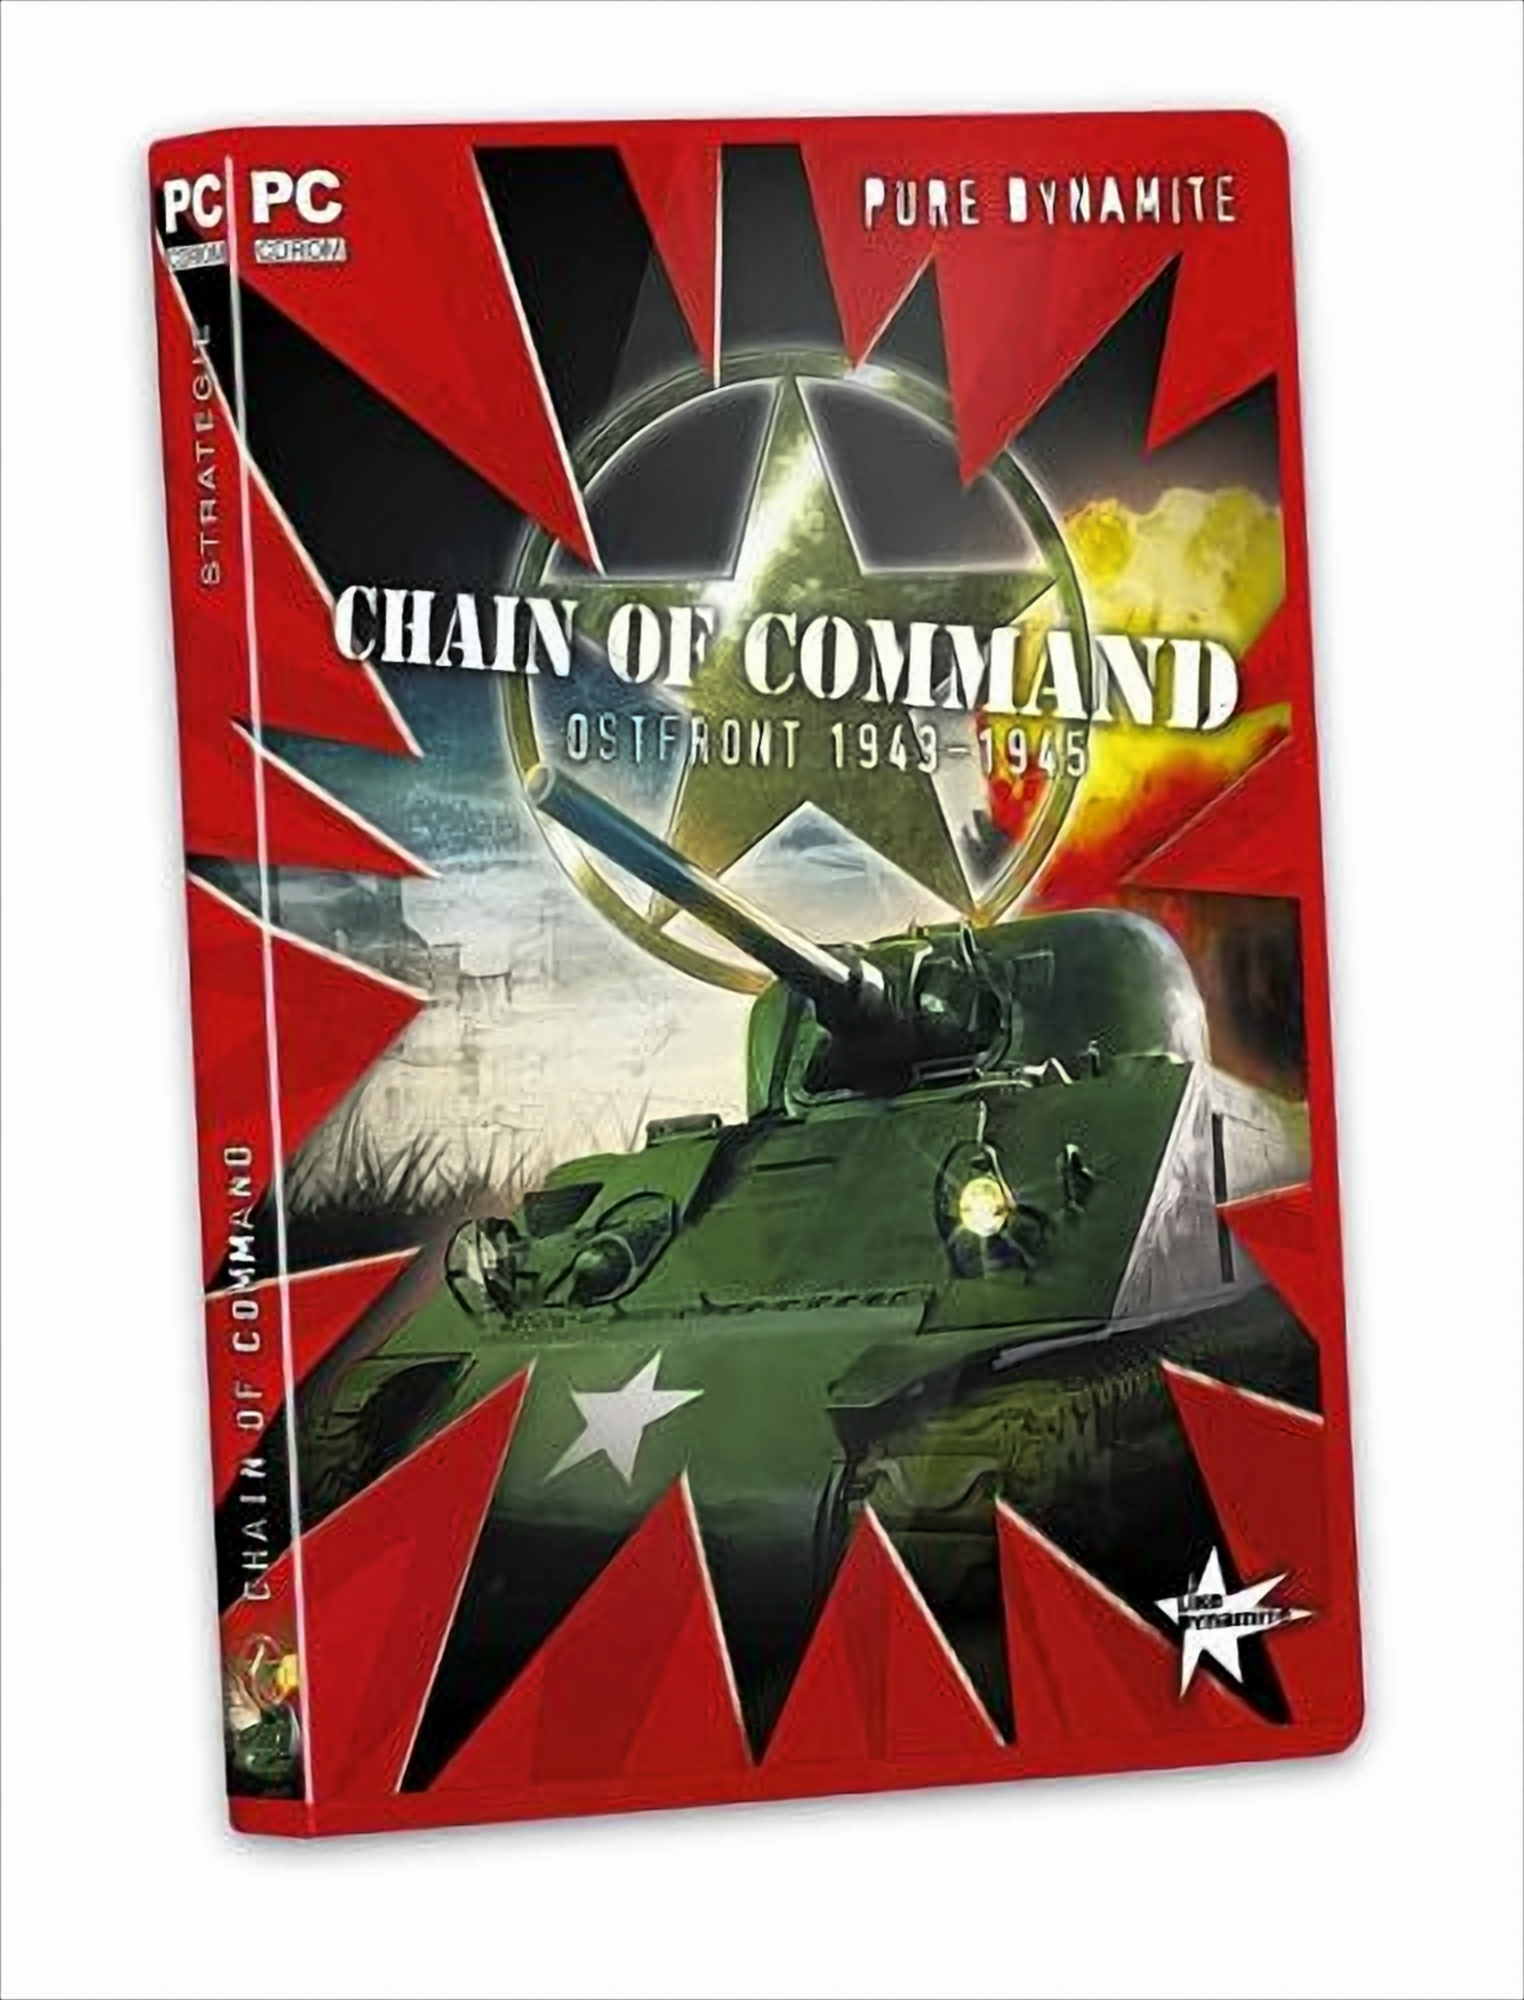 Command: Chain Dynamite] 1943-1945 - [Pure [PC] of Ostfront